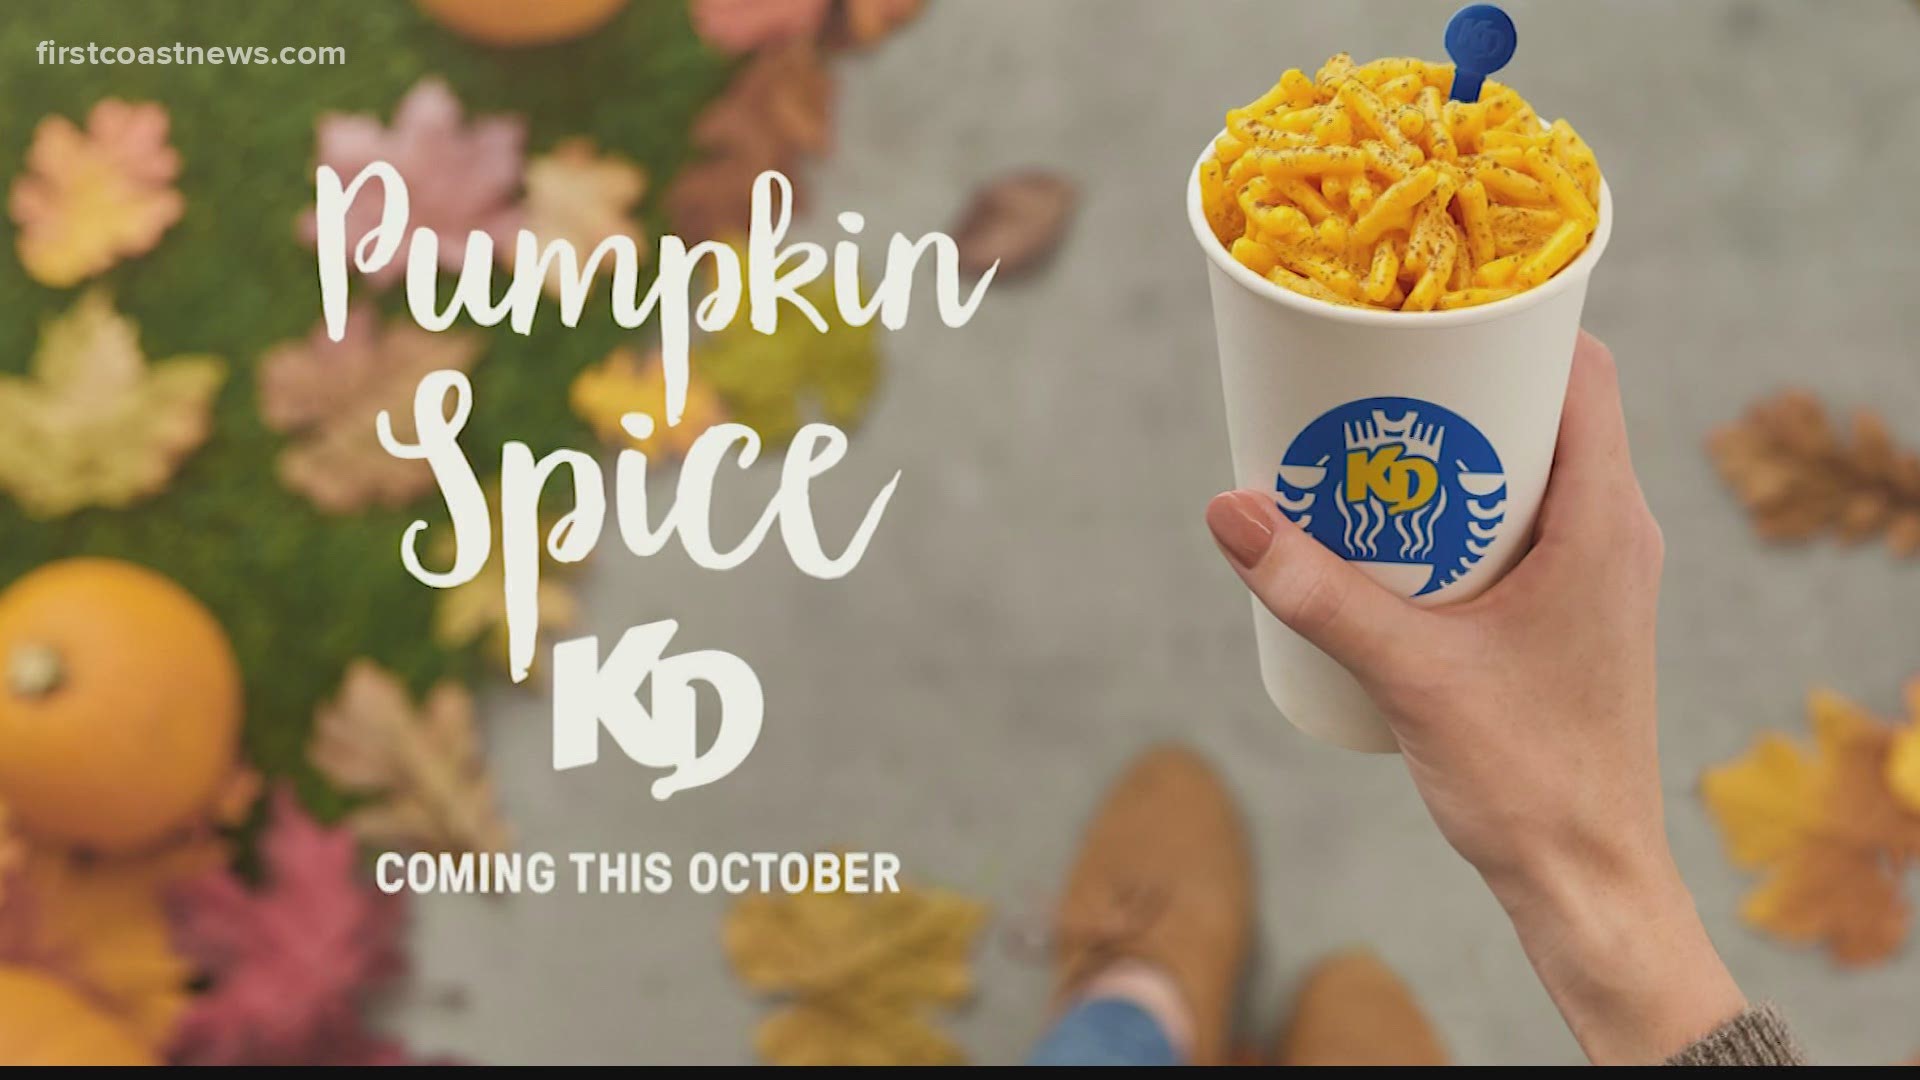 Kraft is releasing pumpkin spice mac and cheese, coming soon to the U.S.